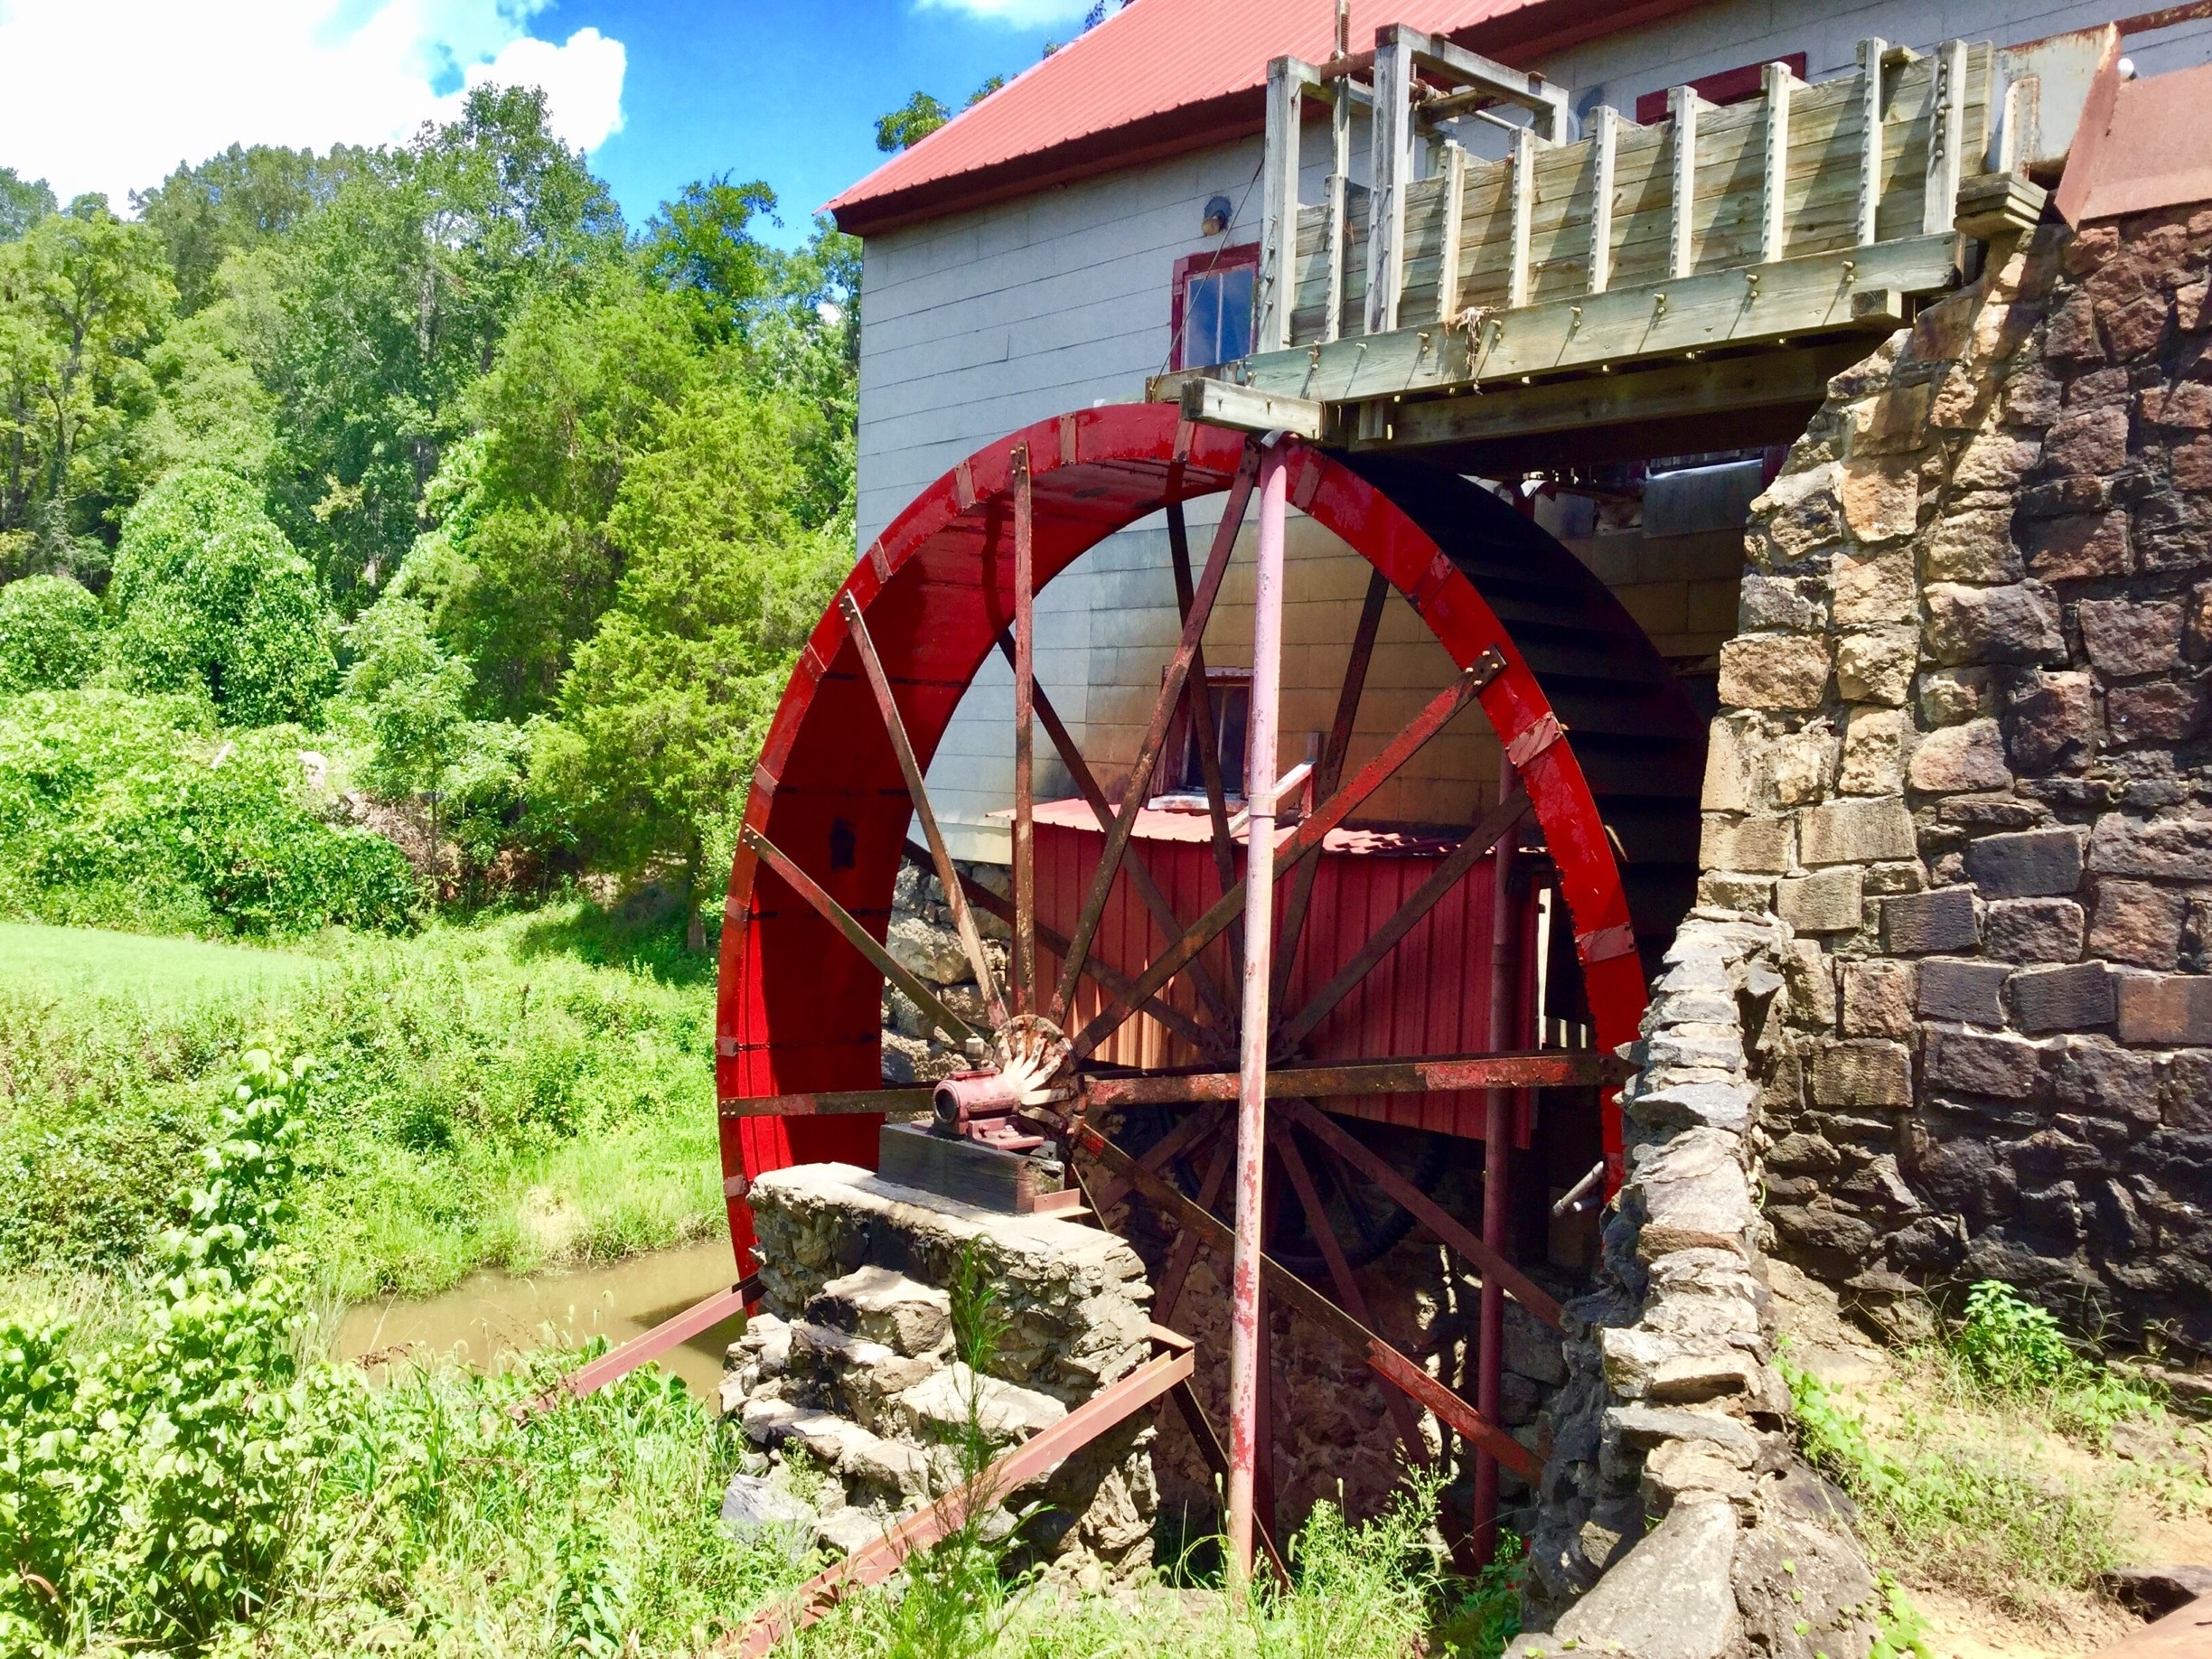 Beautiful old mill still in operation and right off the main road.  Worth stopping by and spending a few minutes enjoying the surroundings.